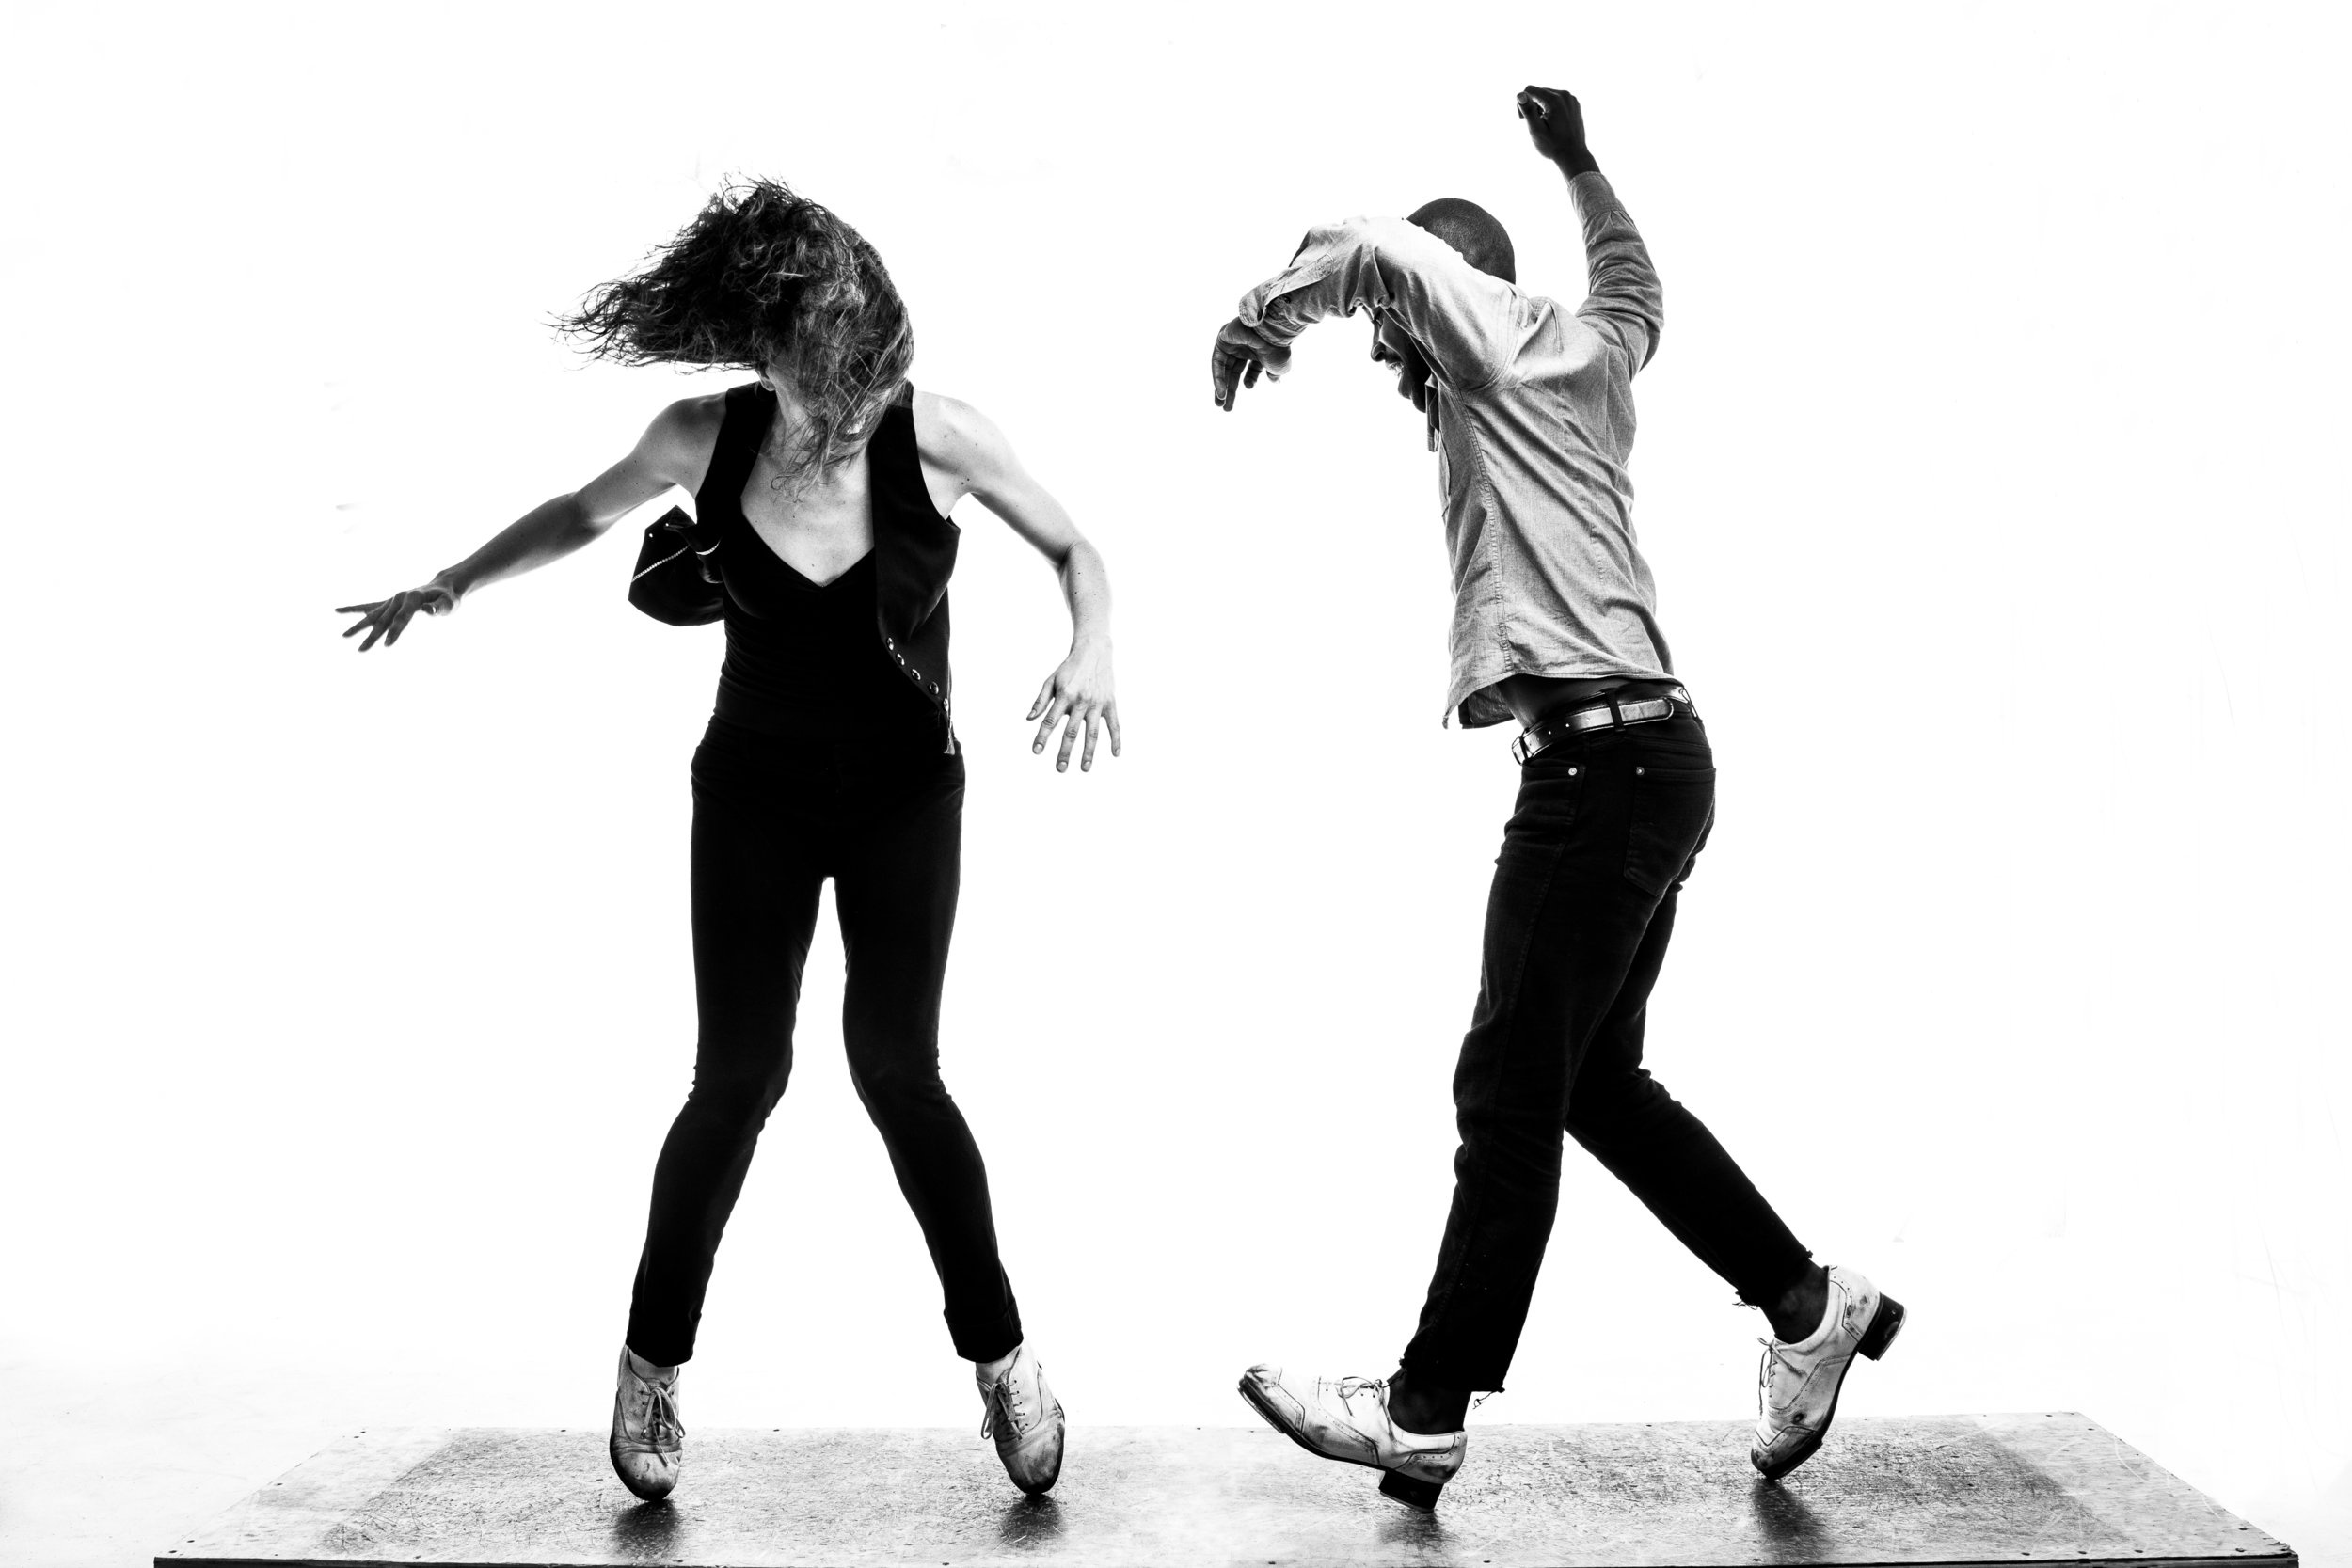 Tap Dance: Dance characterized by using the sounds of tap shoes striking the floor, Michelle Dorrance, Award-winning tap dance company based in New York City. 2500x1670 HD Wallpaper.